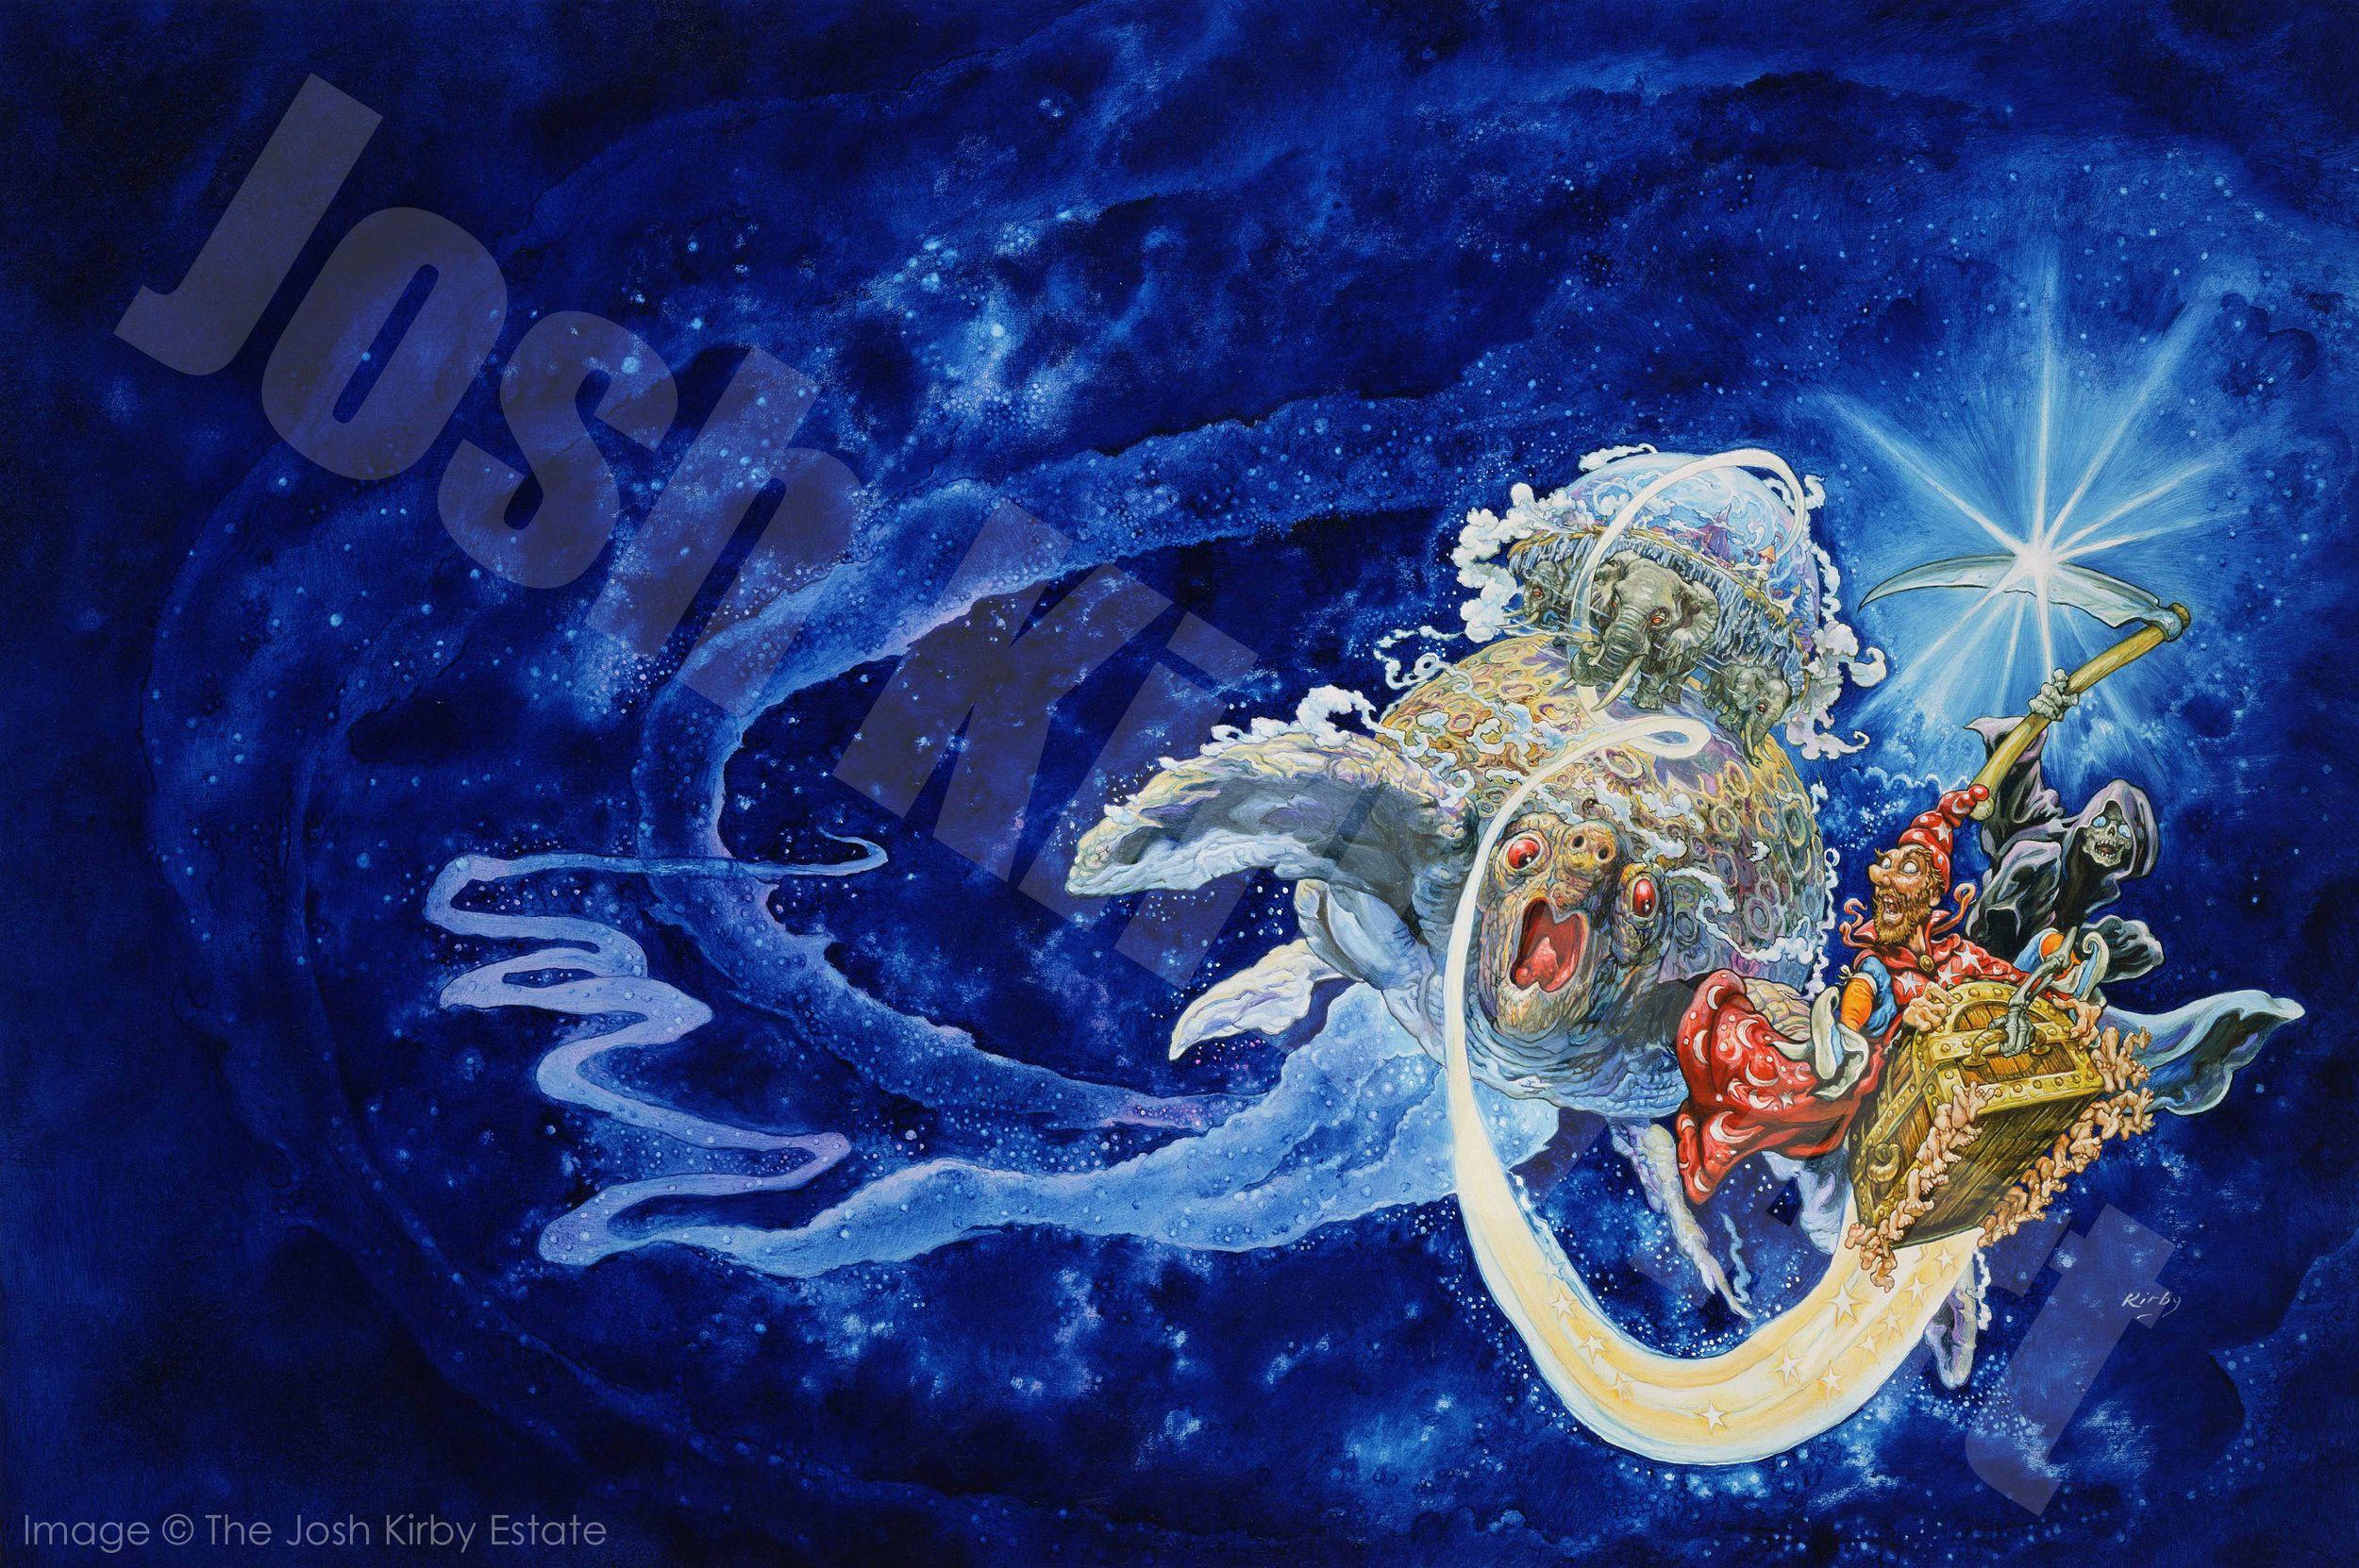 Discworld Wallpapers Top Free Discworld Backgrounds WallpaperAccess